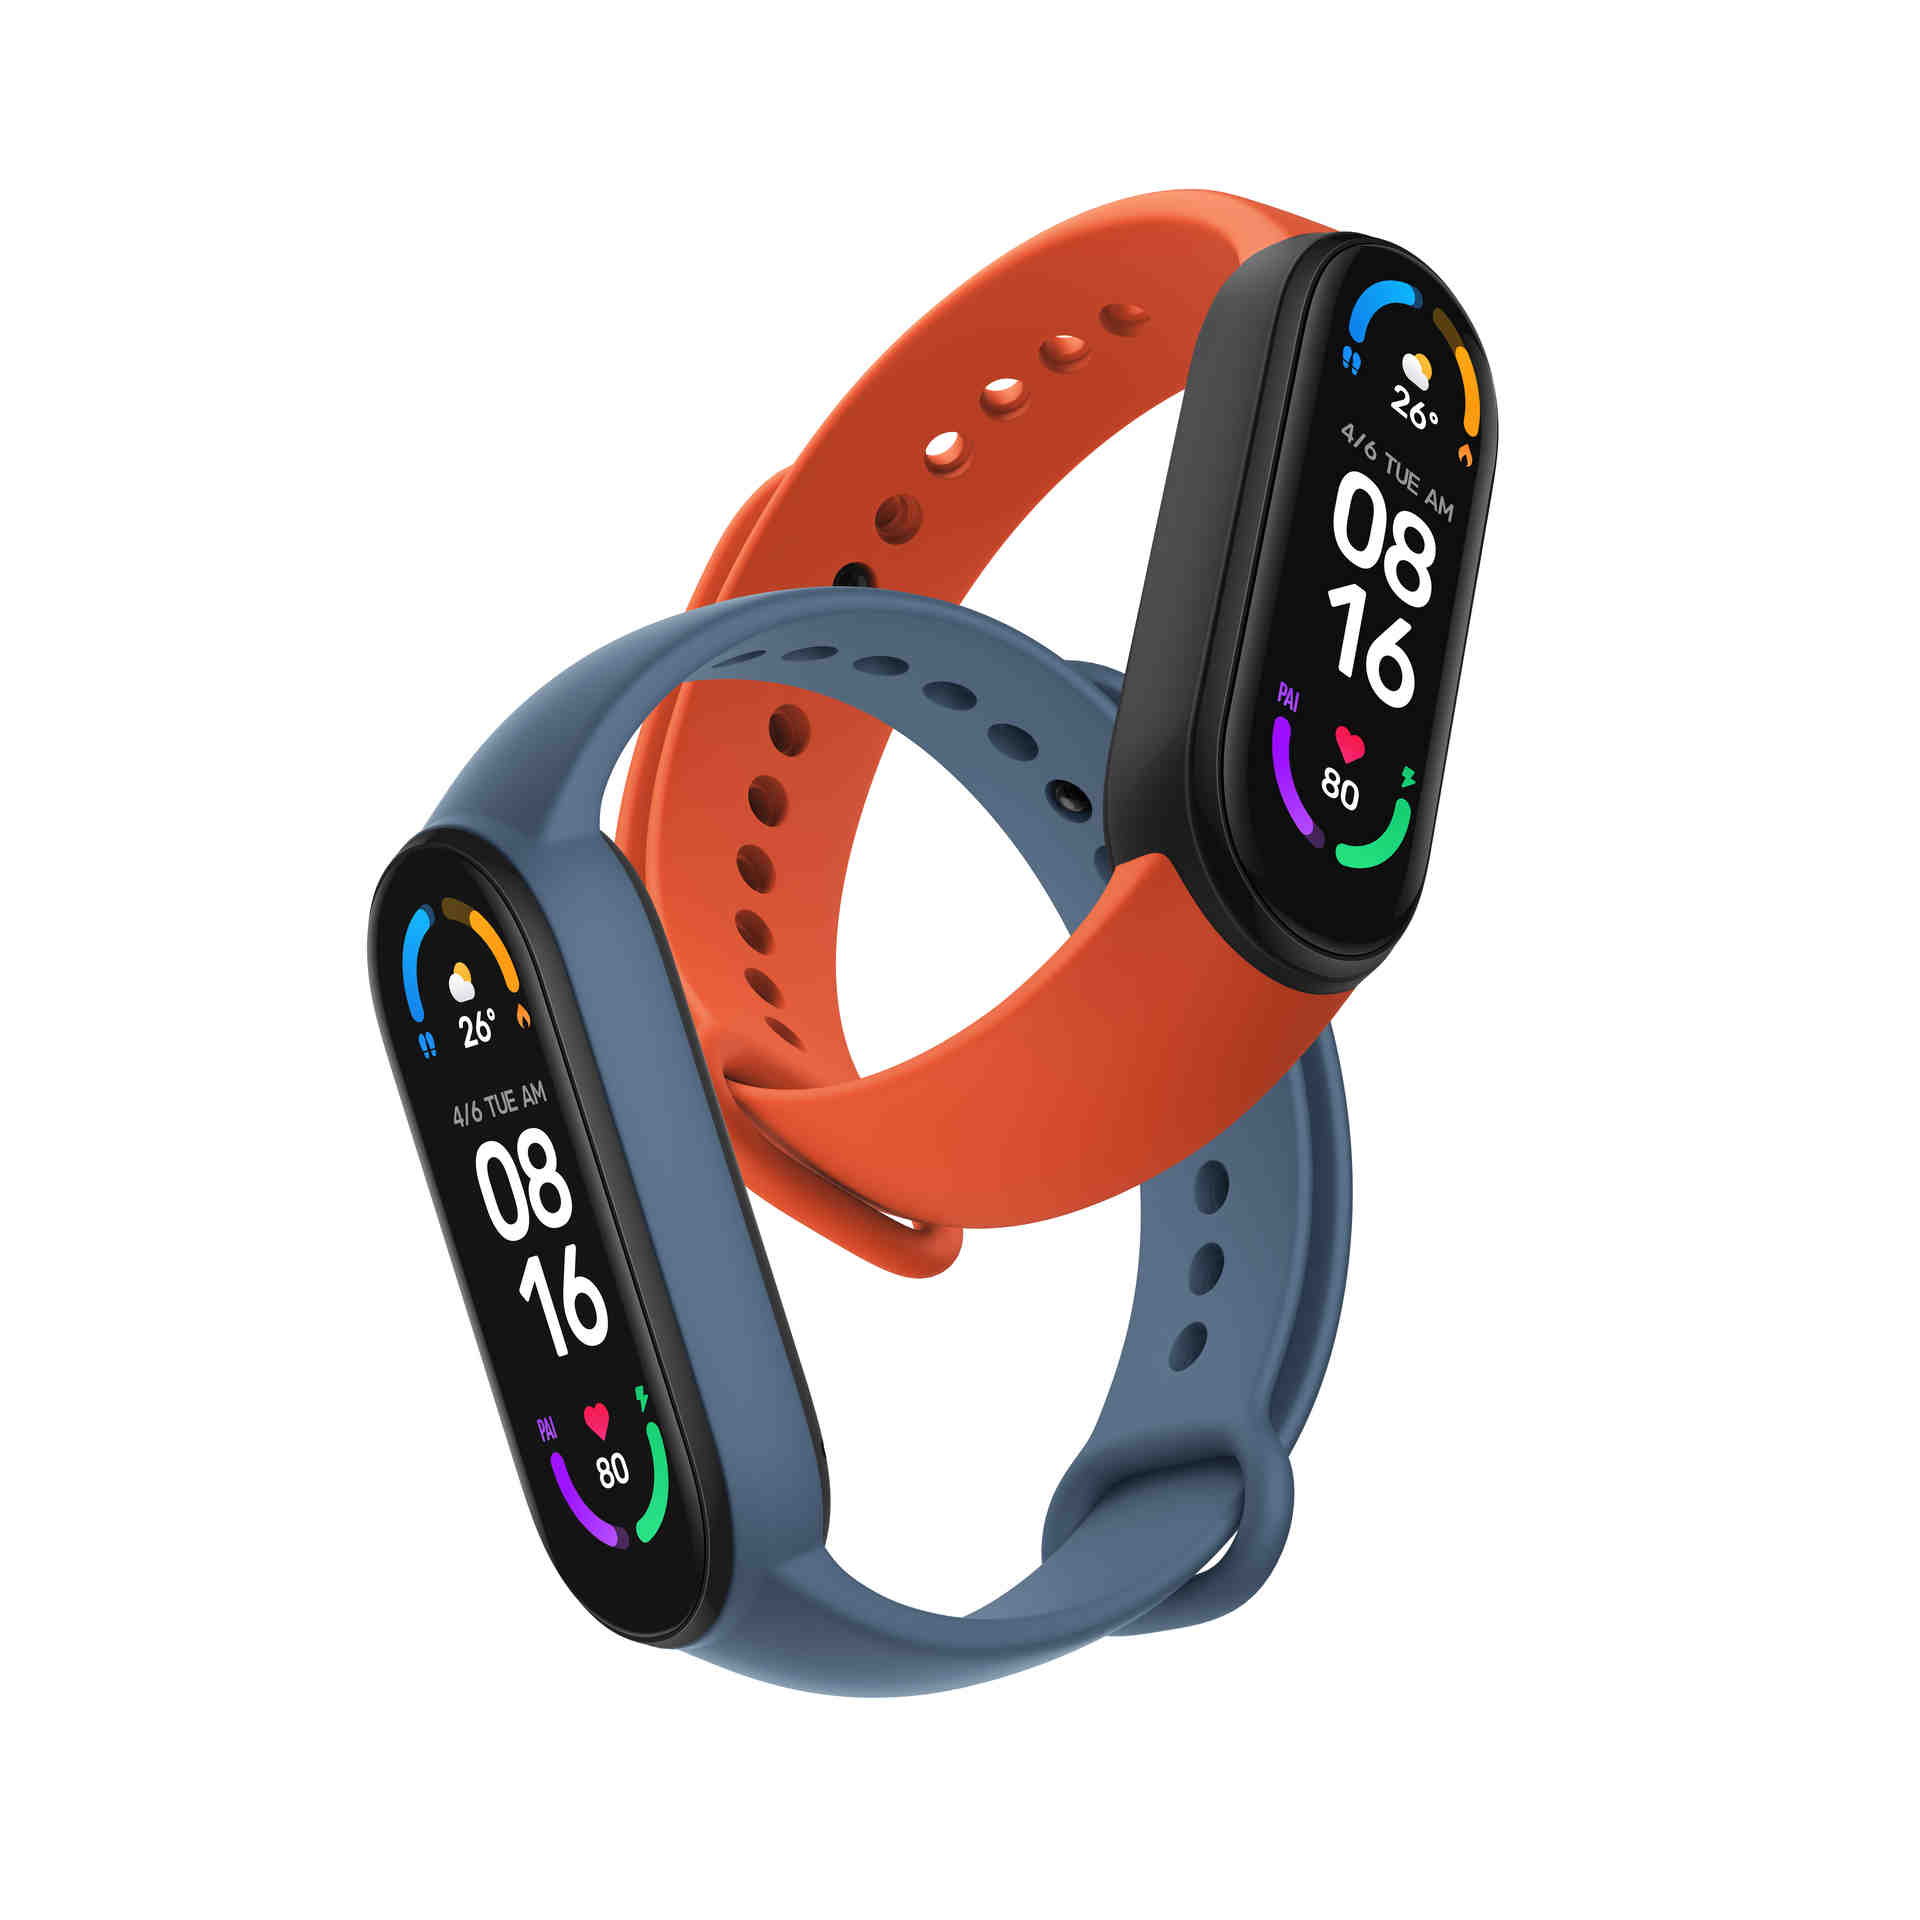 Which is the best fitness tracker for seniors?